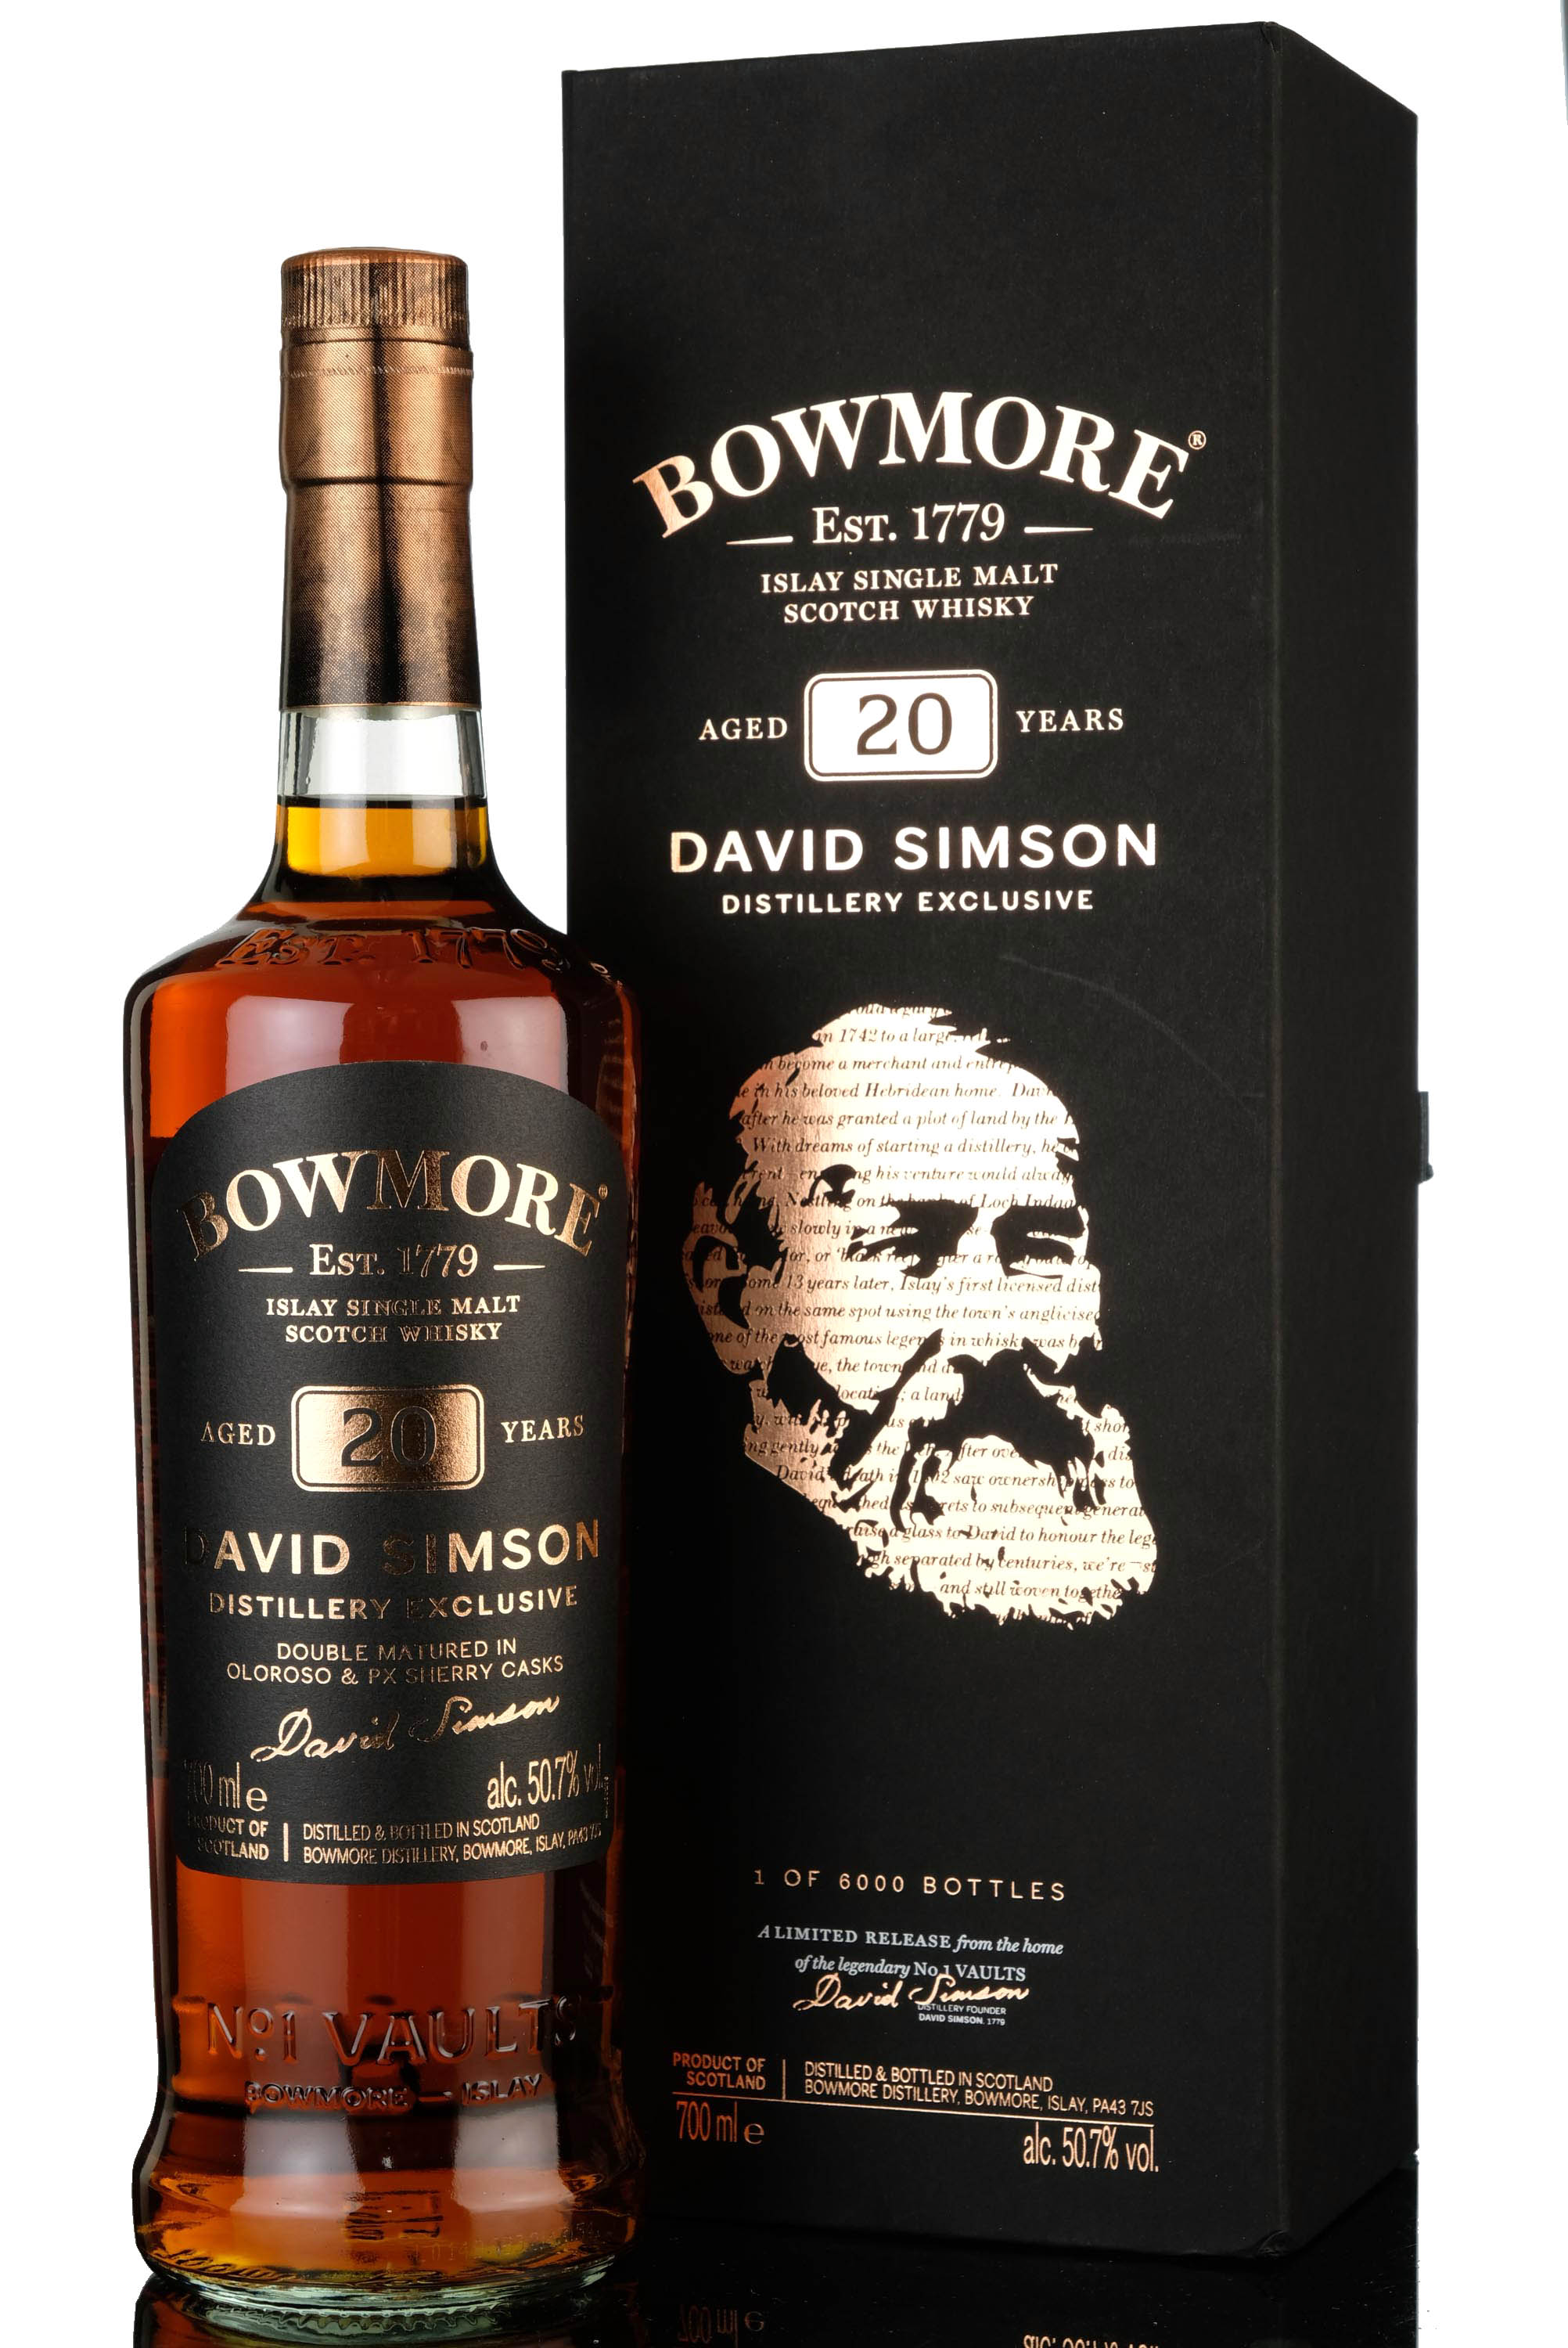 Bowmore 20 Year Old - David Simson Distillery Exclusive